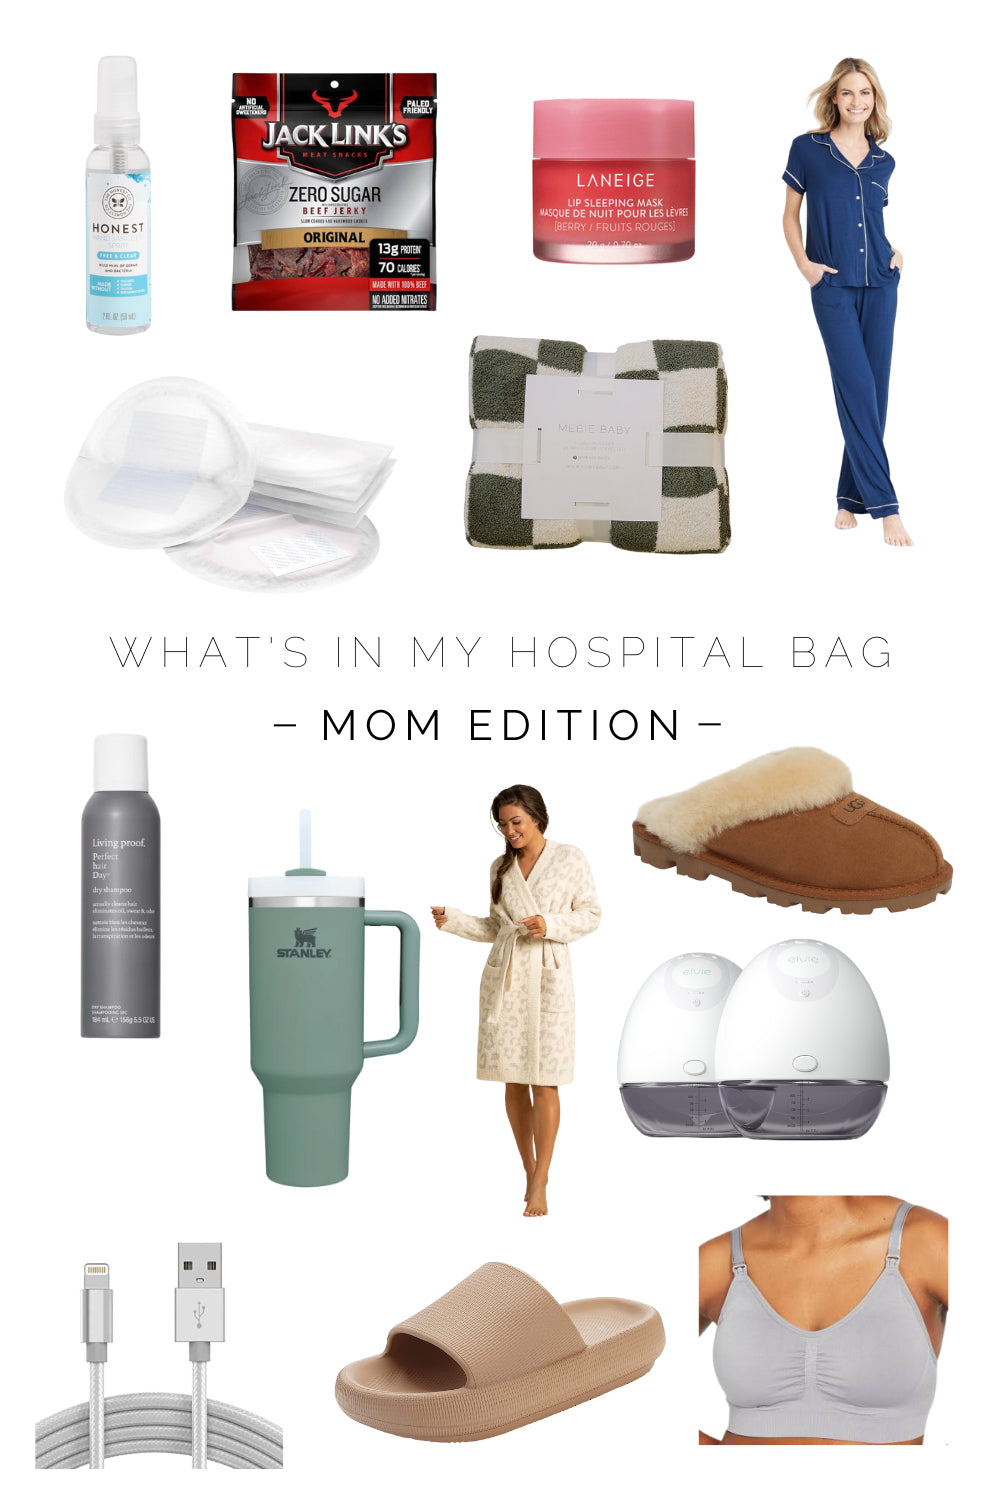 What's in My Hospital Bag? Mom Edition